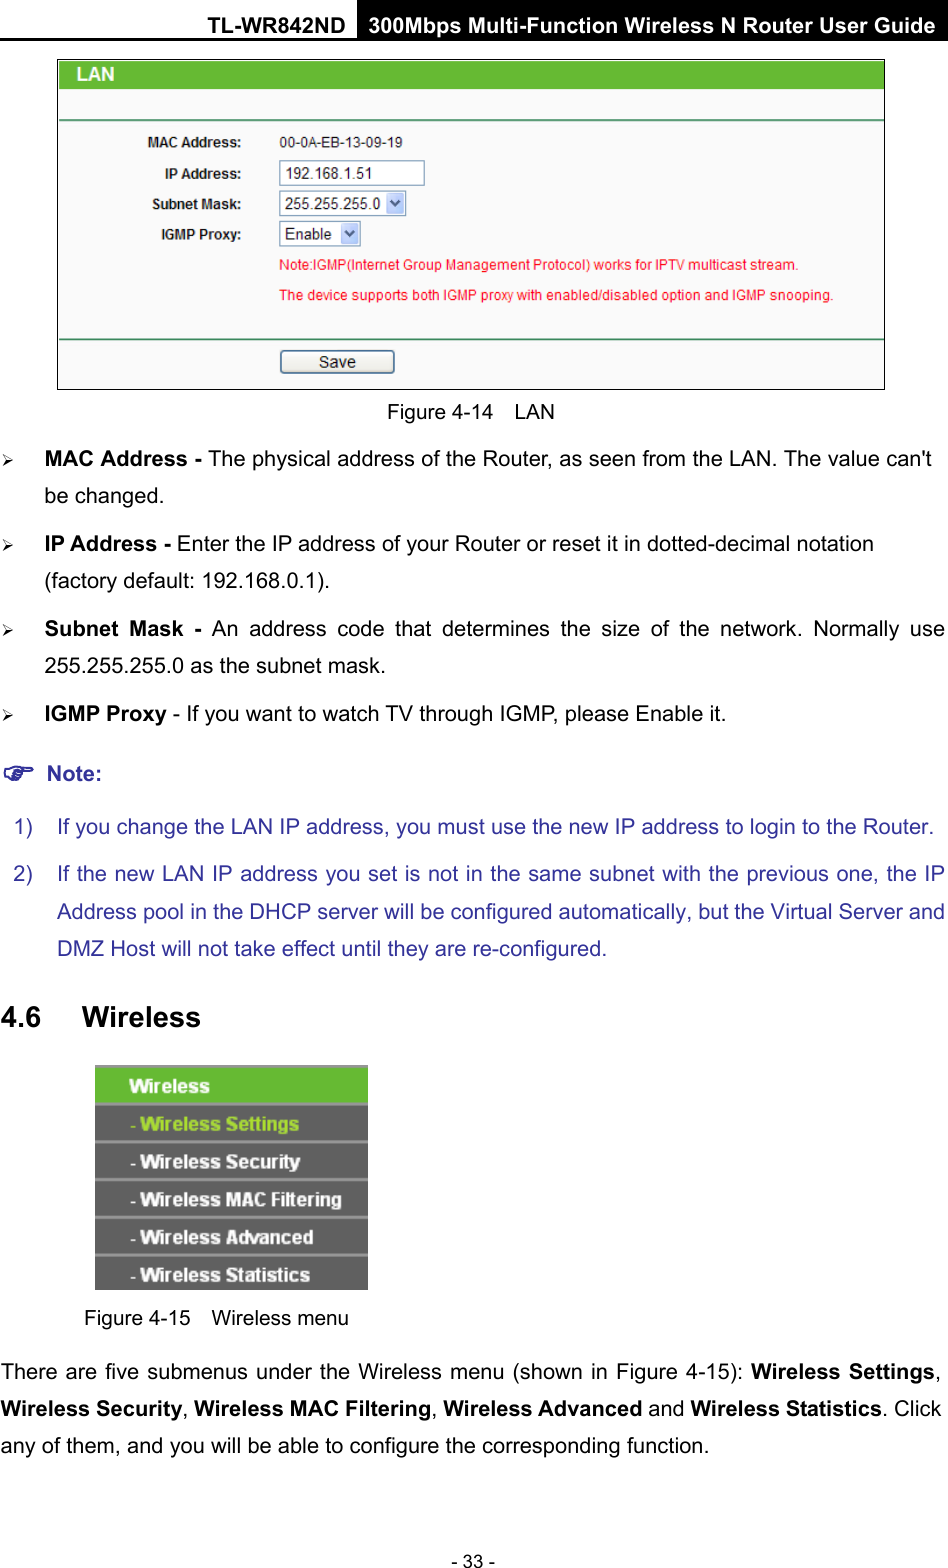 TL-WR842ND 300Mbps Multi-Function Wireless N Router User Guide  - 33 -  Figure 4-14  LAN  MAC Address - The physical address of the Router, as seen from the LAN. The value can&apos;t be changed.  IP Address - Enter the IP address of your Router or reset it in dotted-decimal notation (factory default: 192.168.0.1).  Subnet Mask - An address code that determines the size of the network. Normally use 255.255.255.0 as the subnet mask.    IGMP Proxy - If you want to watch TV through IGMP, please Enable it.  Note: 1) If you change the LAN IP address, you must use the new IP address to login to the Router.   2) If the new LAN IP address you set is not in the same subnet with the previous one, the IP Address pool in the DHCP server will be configured automatically, but the Virtual Server and DMZ Host will not take effect until they are re-configured. 4.6 Wireless  Figure 4-15  Wireless menu There are five submenus under the Wireless menu (shown in Figure 4-15): Wireless Settings, Wireless Security, Wireless MAC Filtering, Wireless Advanced and Wireless Statistics. Click any of them, and you will be able to configure the corresponding function.   